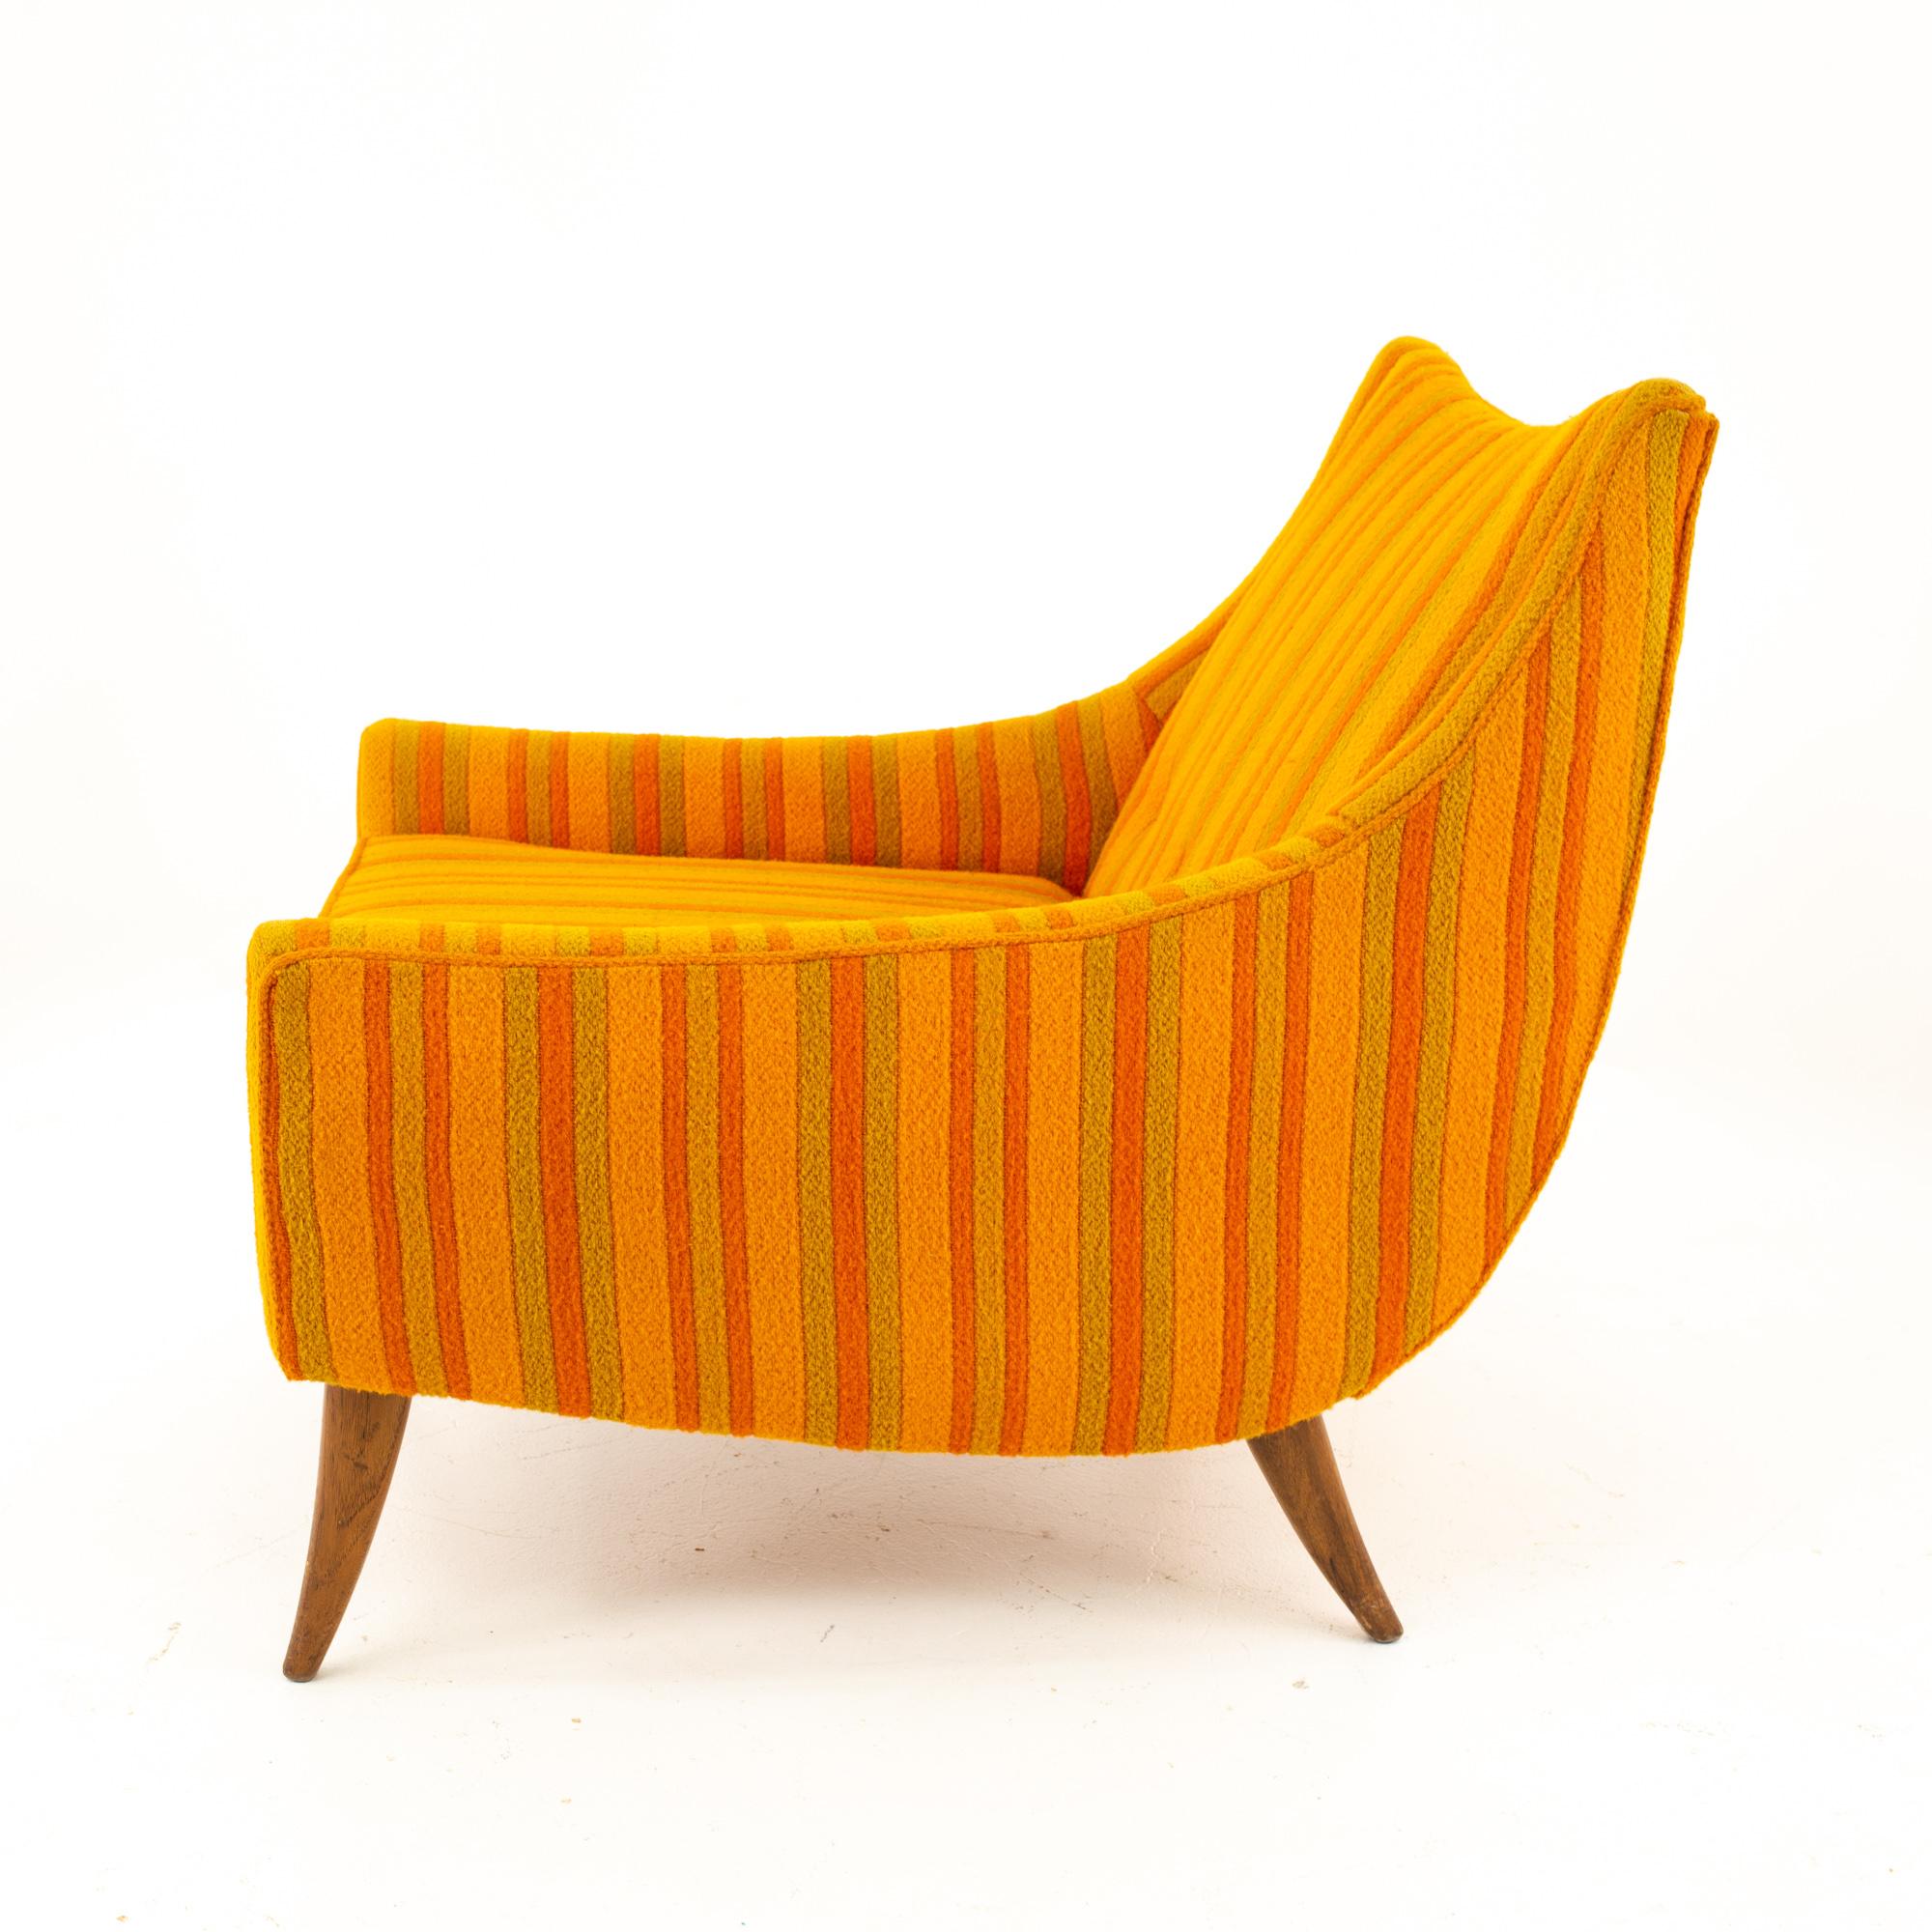 Upholstery Adrian Pearsall Style Kroehler Midcentury Orange and Green Striped Lounge Chair